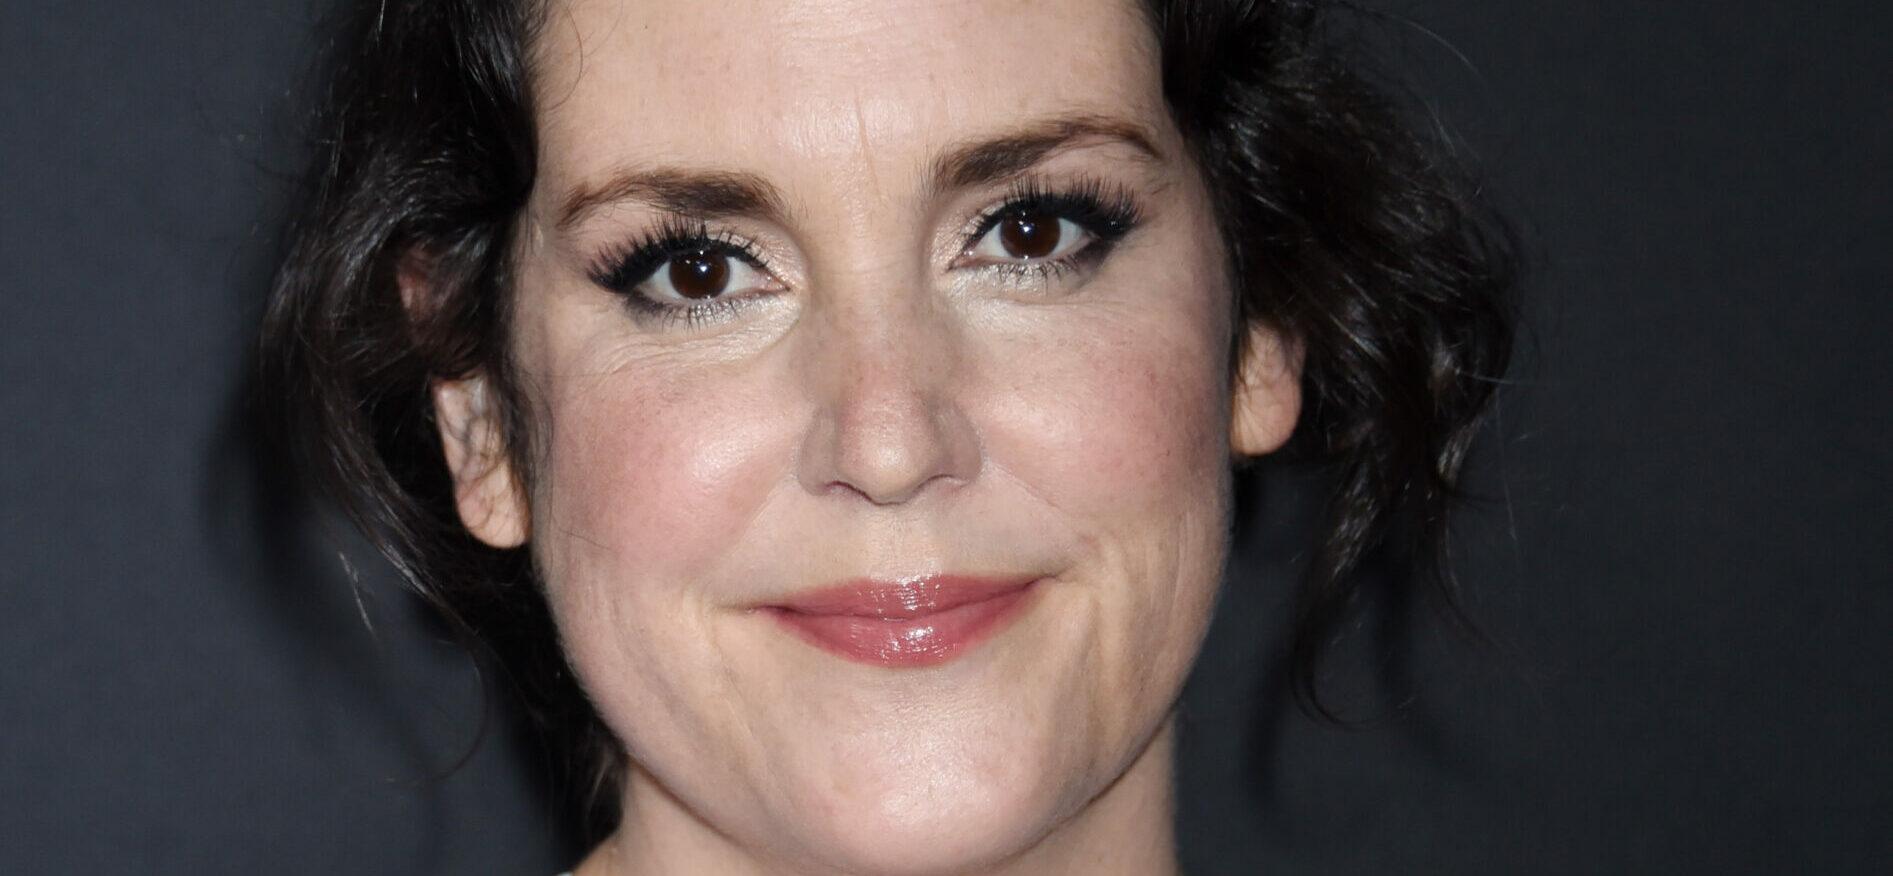 Melanie Lynskey at the Yellowjackets Premiere Event